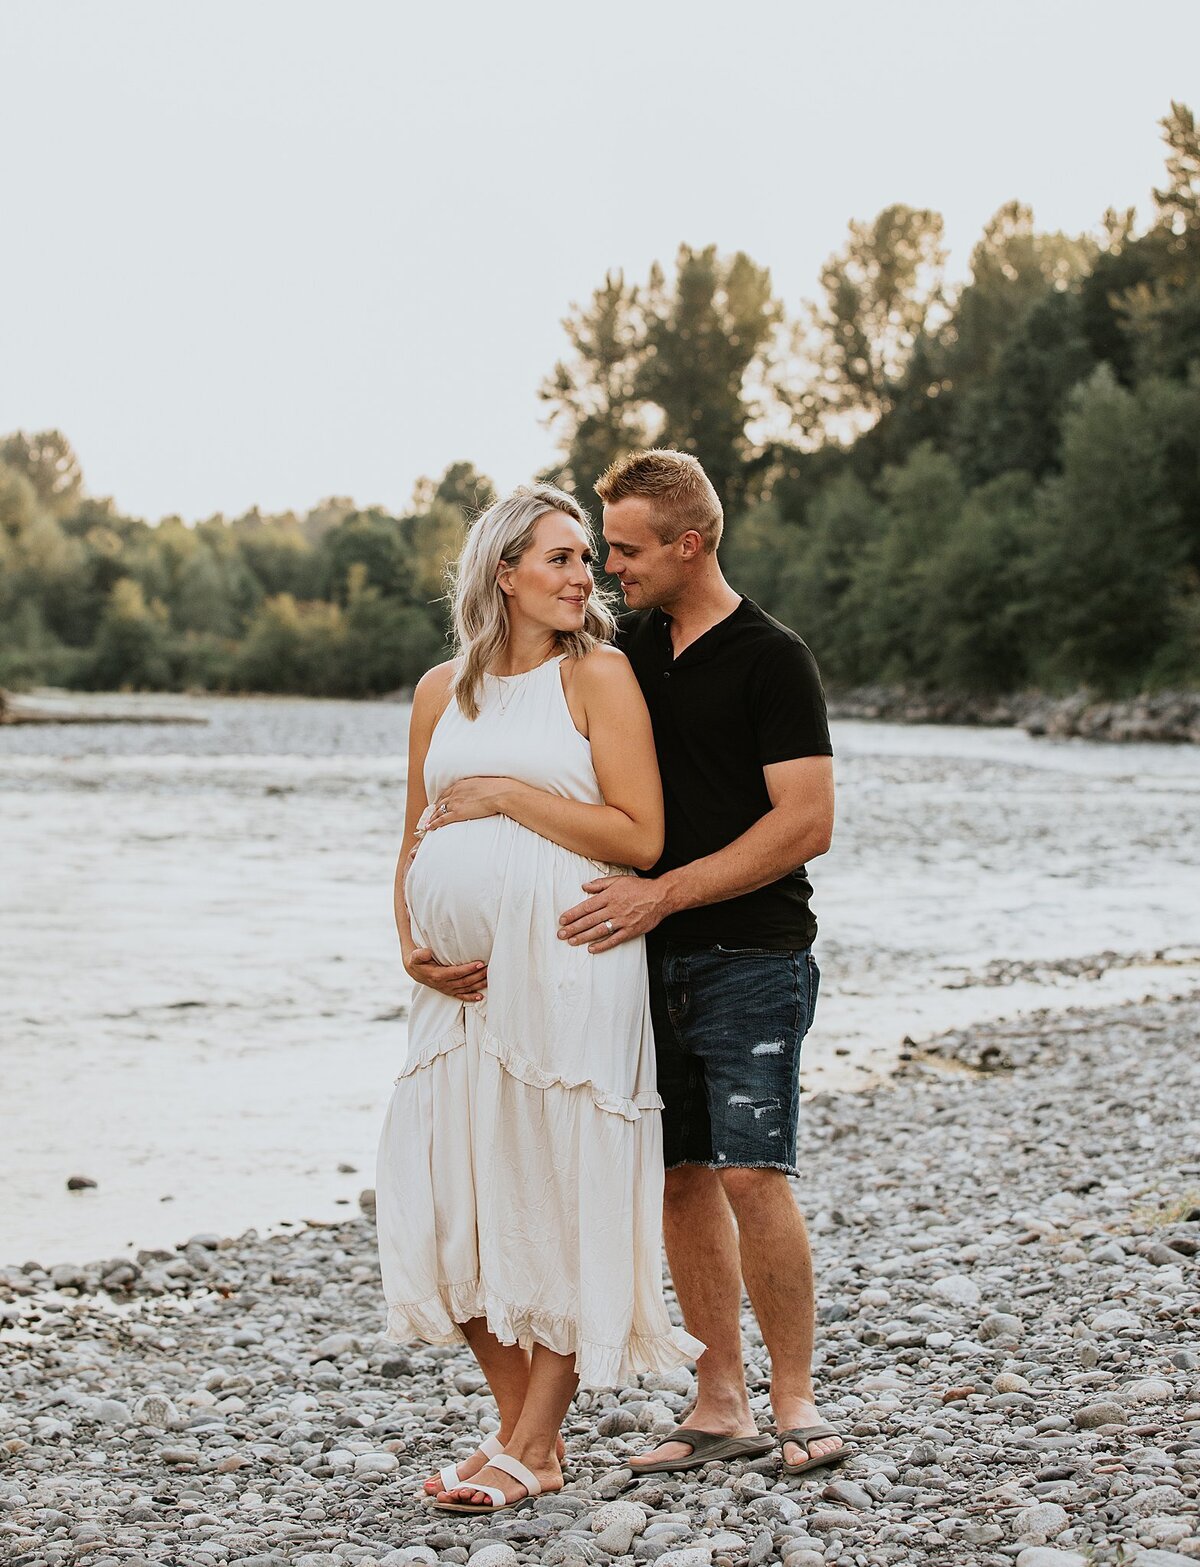 Maternity session on the beach